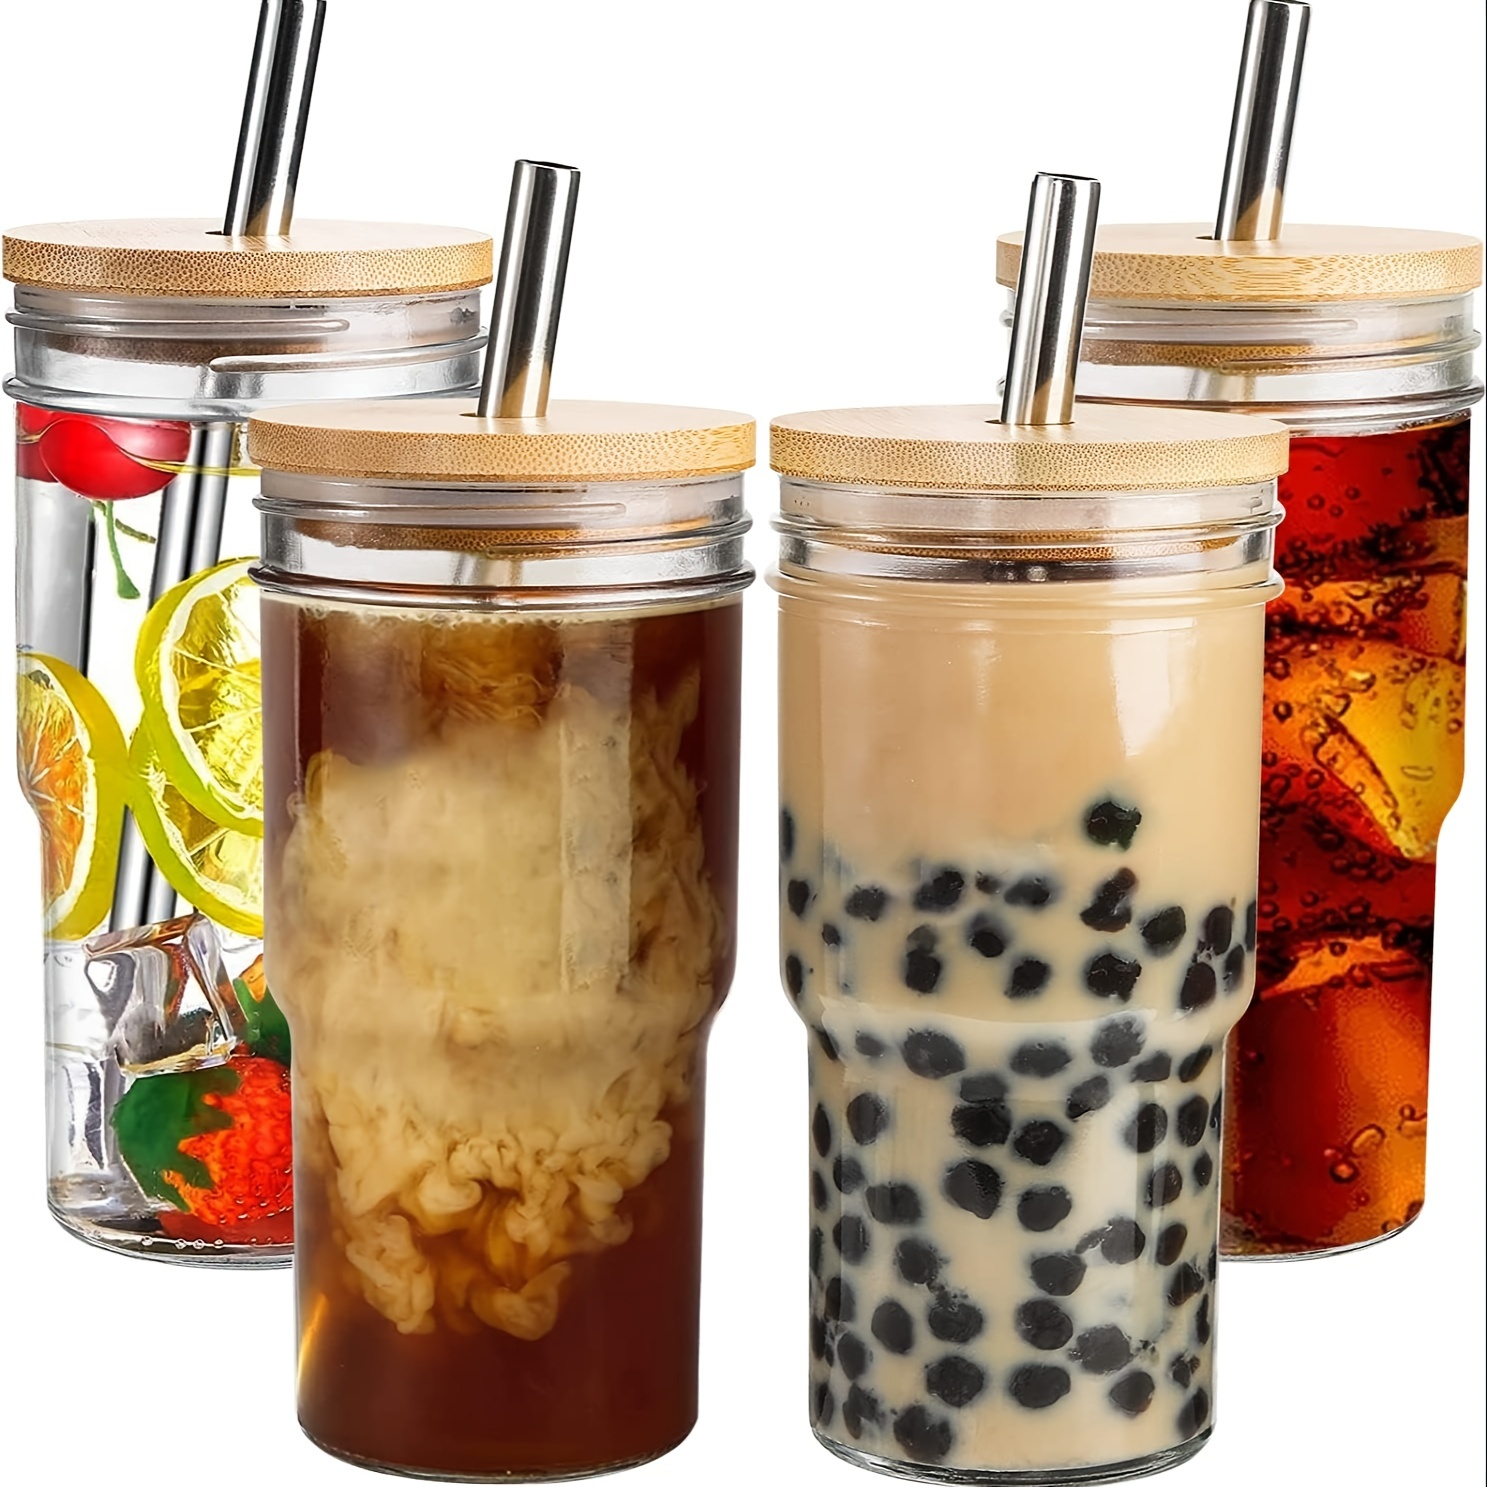 Boba Tea Tumbler: Reusable cup that always looks filled with bubble tea.